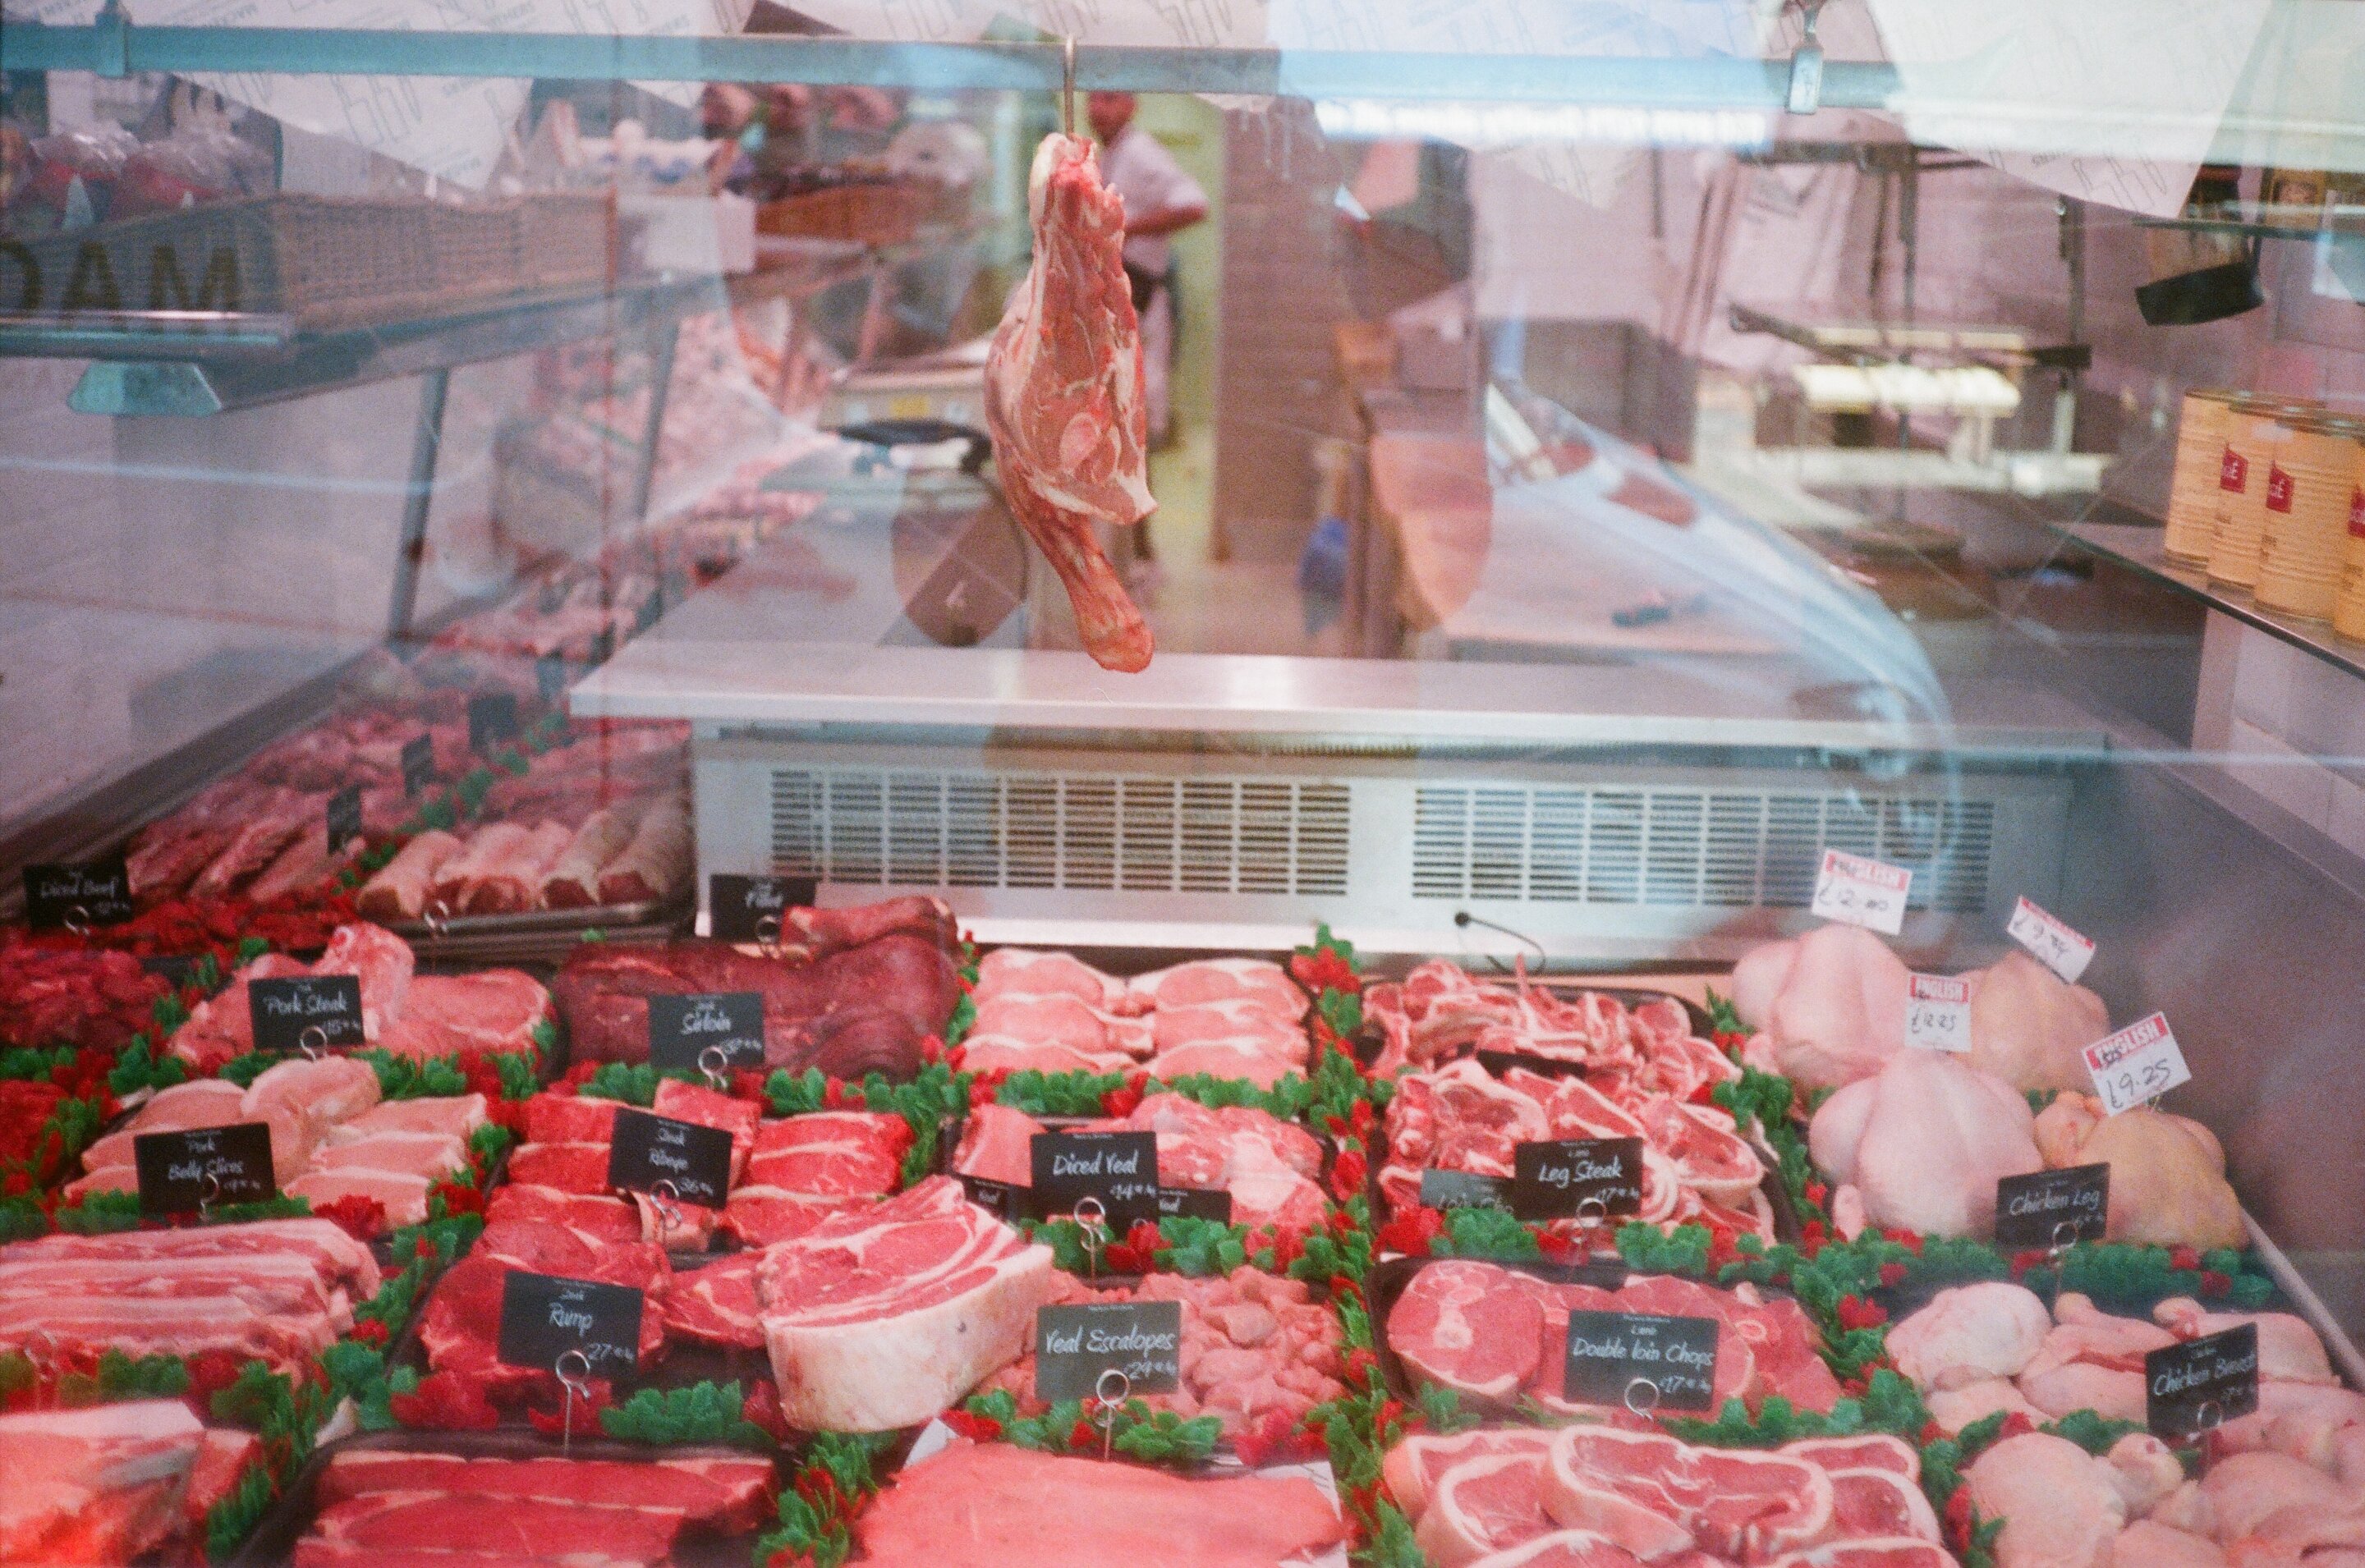 Scientists Are Literally Spinning Up Lab-Grown Meat